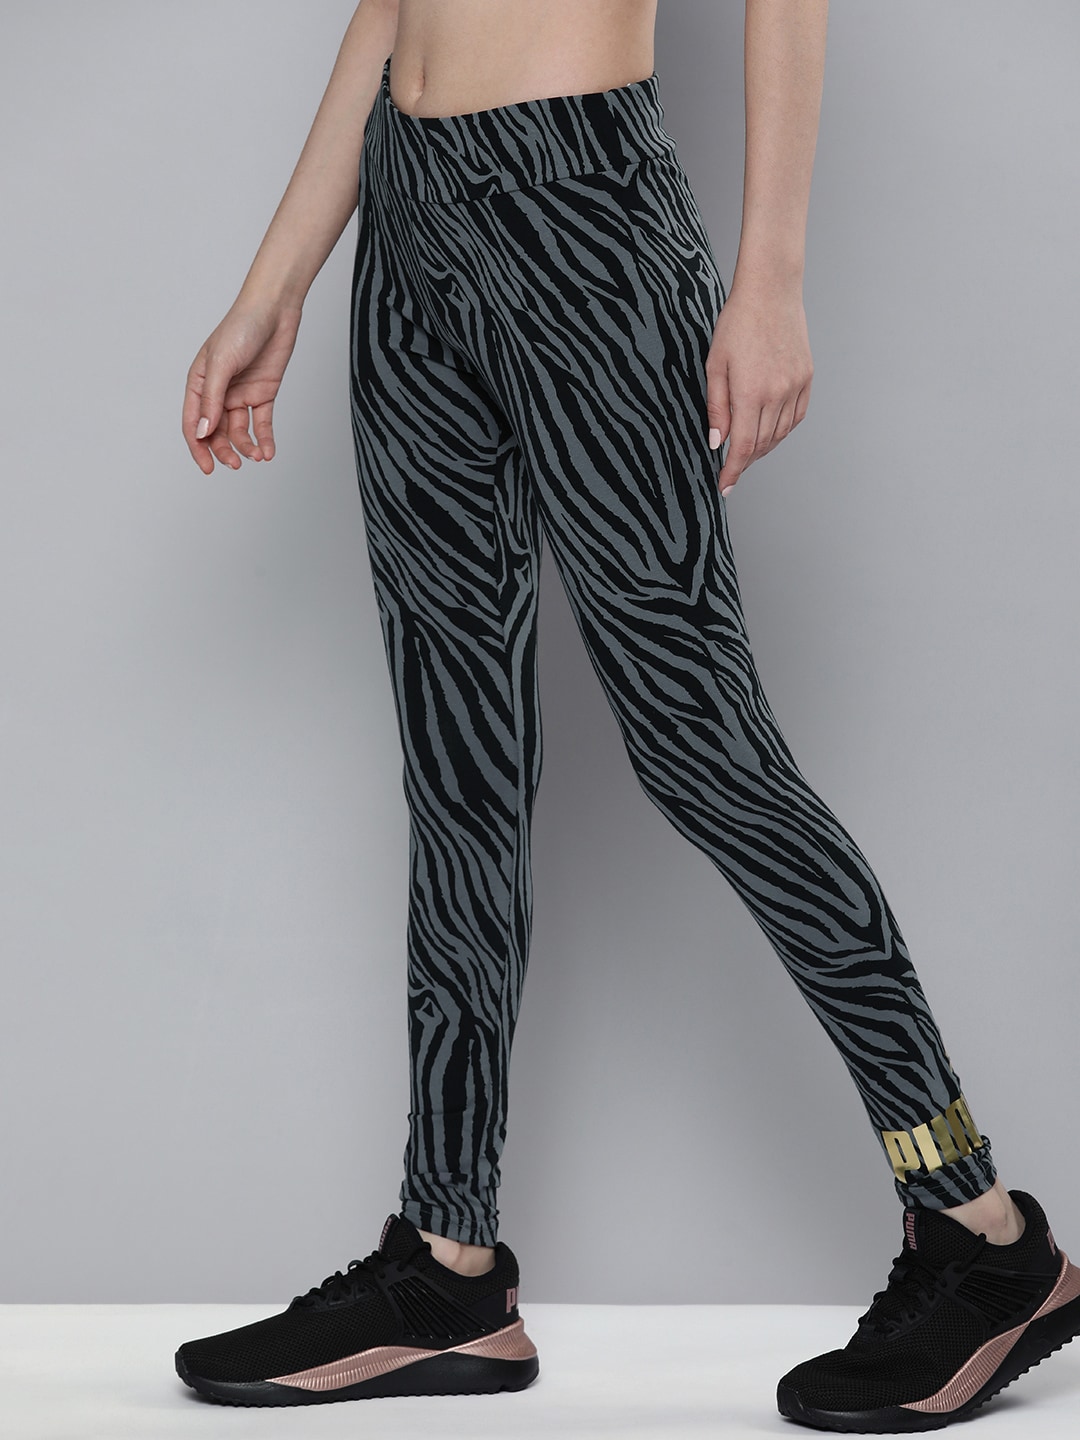 Puma Women Black And Grey Animal Printed Mid-Rise Tights Price in India